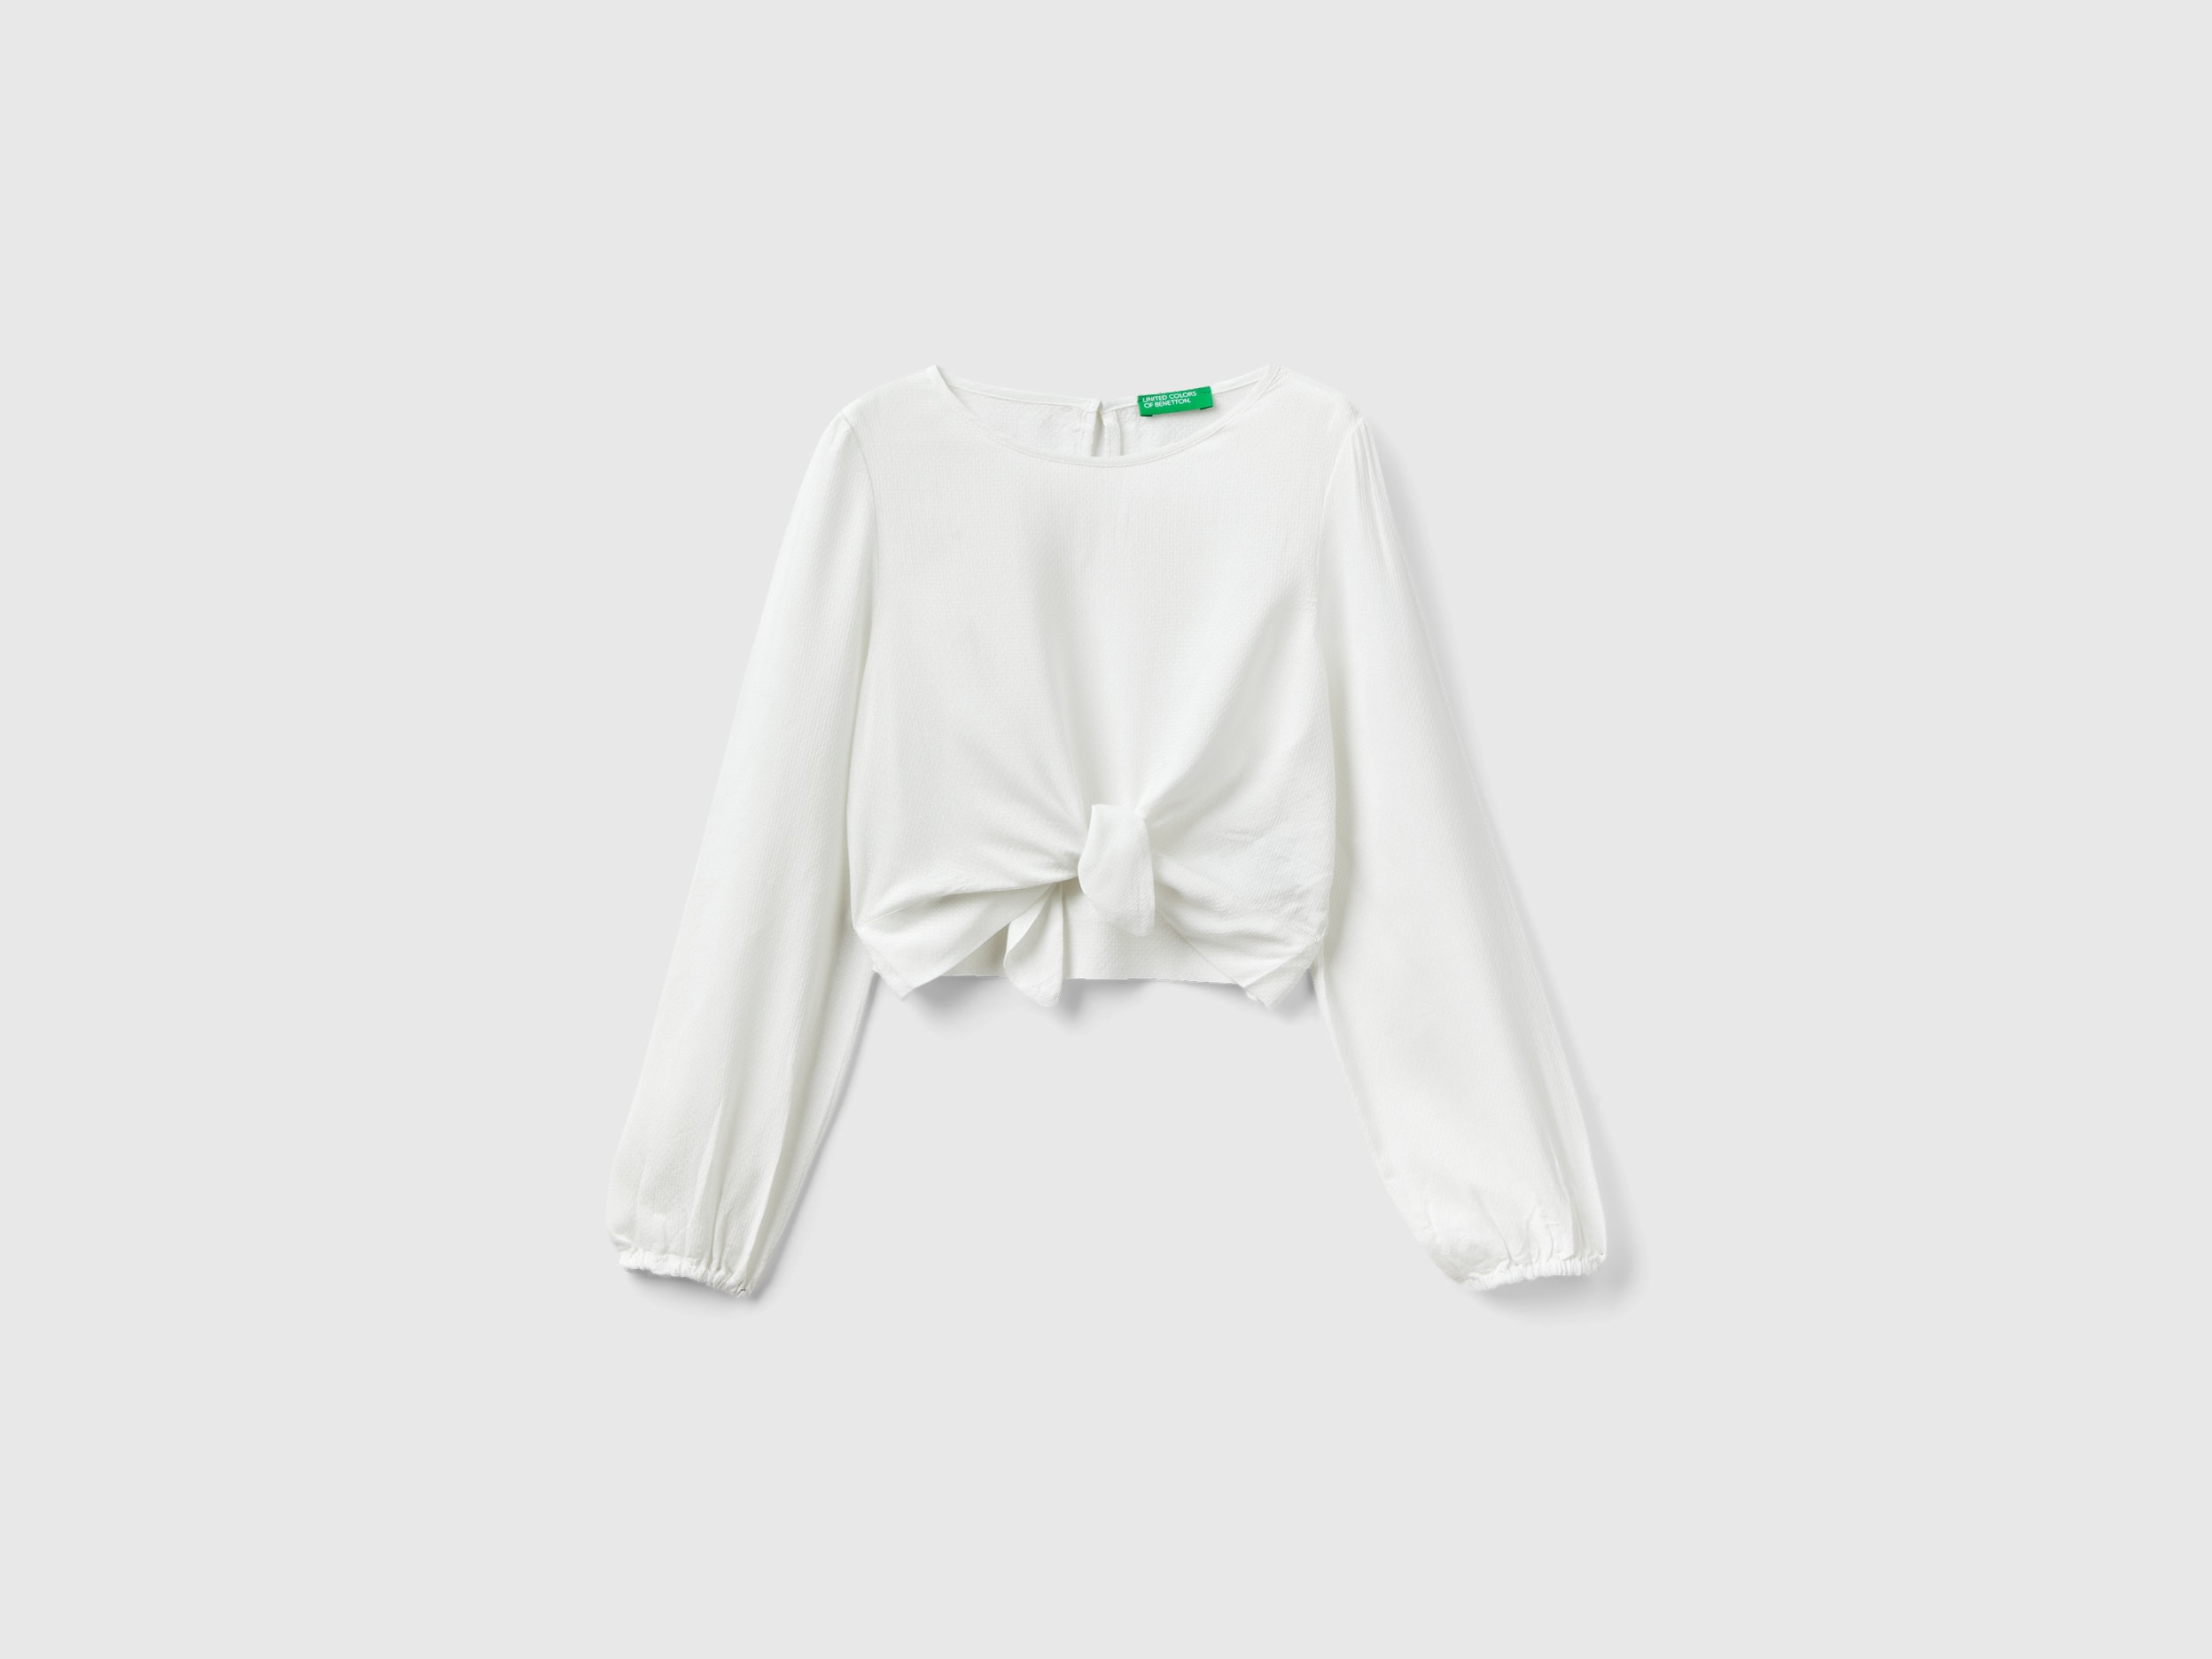 Benetton, Cropped Blouse With Knot, size 3XL, Creamy White, Kids